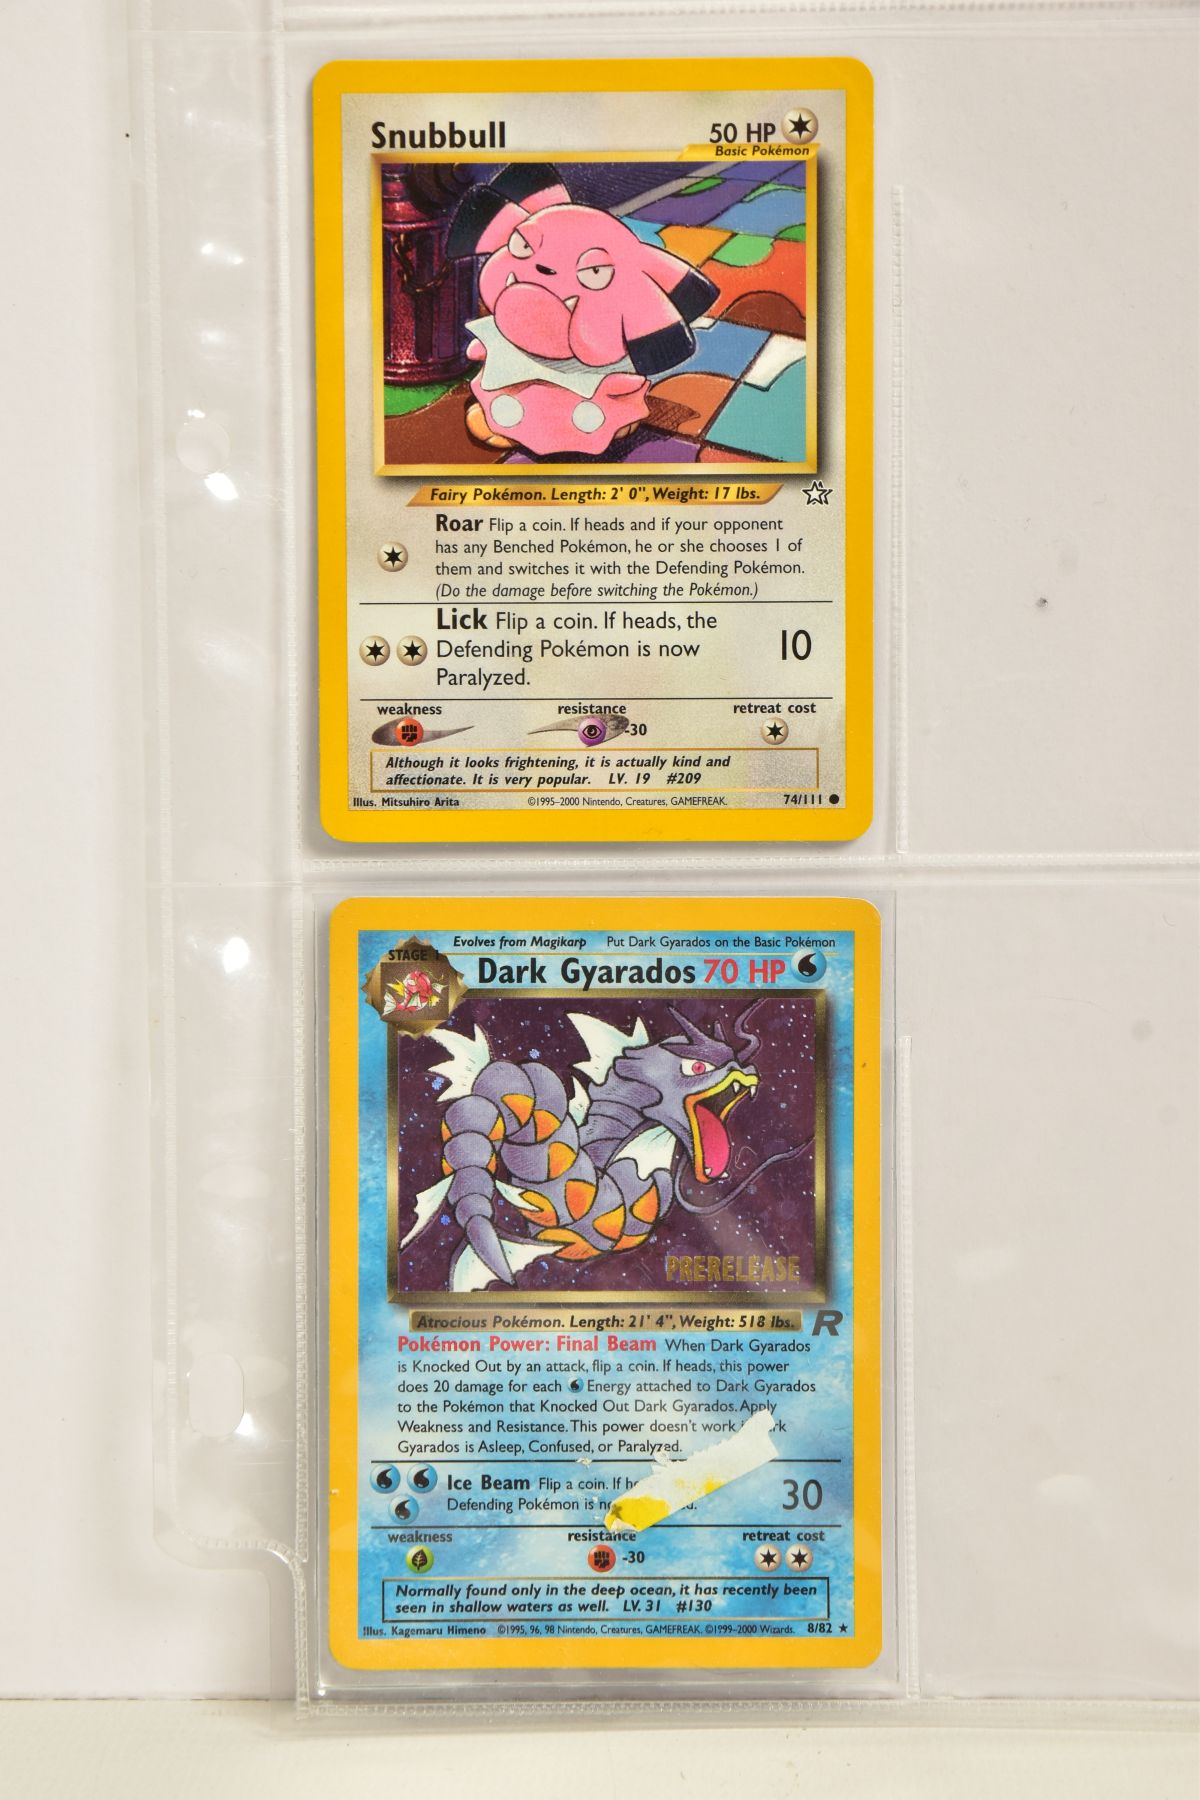 A QUANTITY OF POKEMON TCG CARDS, cards are assorted from Base Set, Base Set 2, Jungle, Fossil, - Image 45 of 46